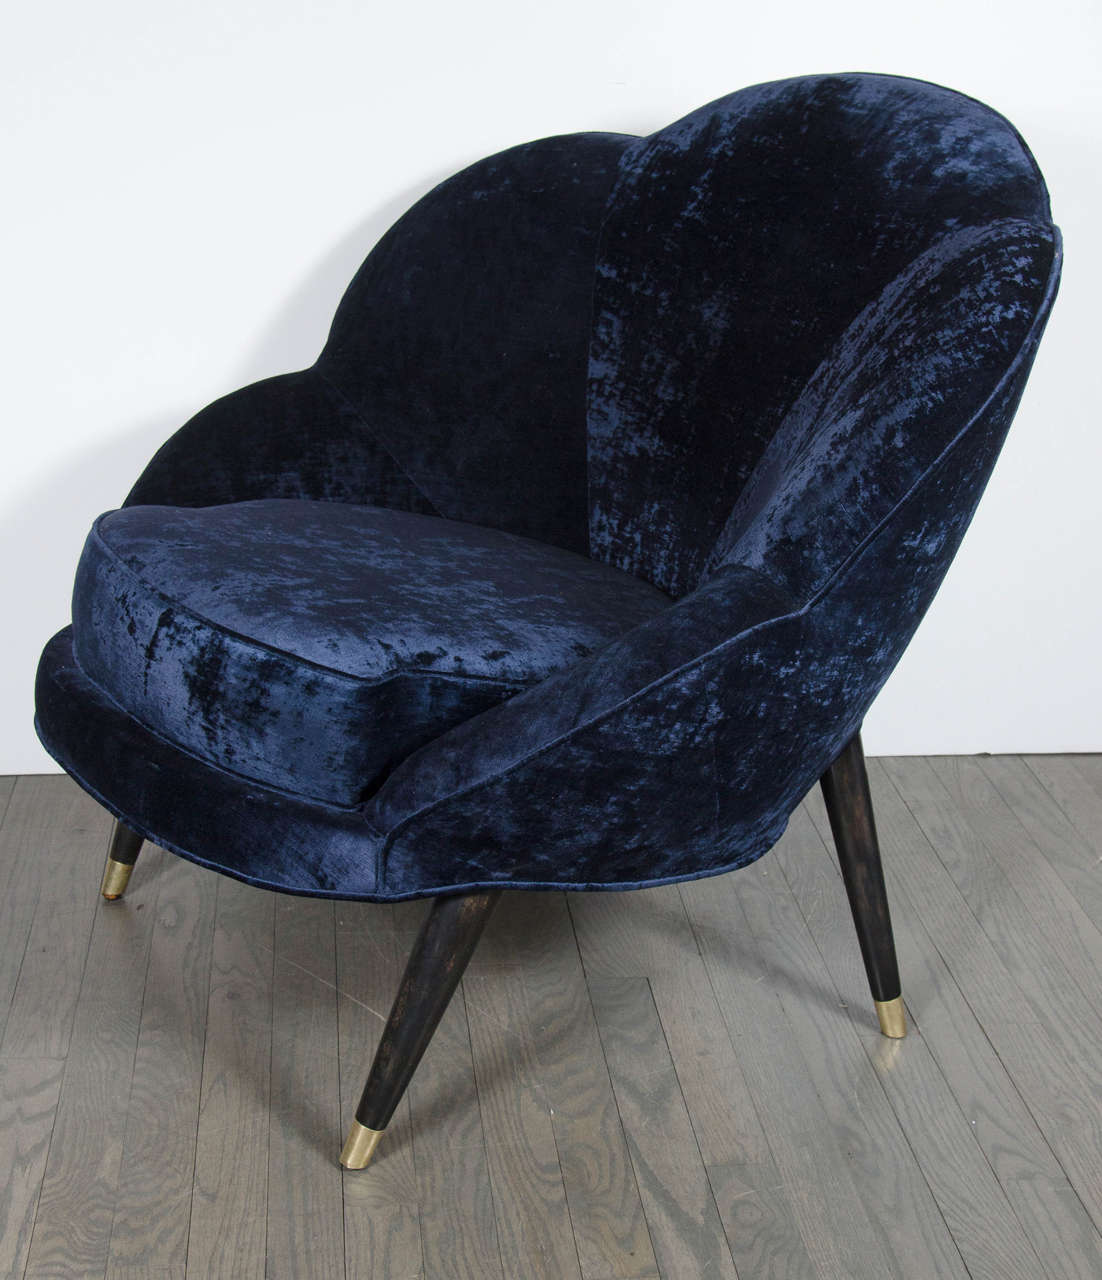 Mid-Century Modernist 'Flower' Chair with Ebonized Walnut legs, brass sabots and upholstered in a sapphire blue velvet upholstery.  This playful but sophisticated chair features a streamlined style.  The chairs curved back takes the shape of a